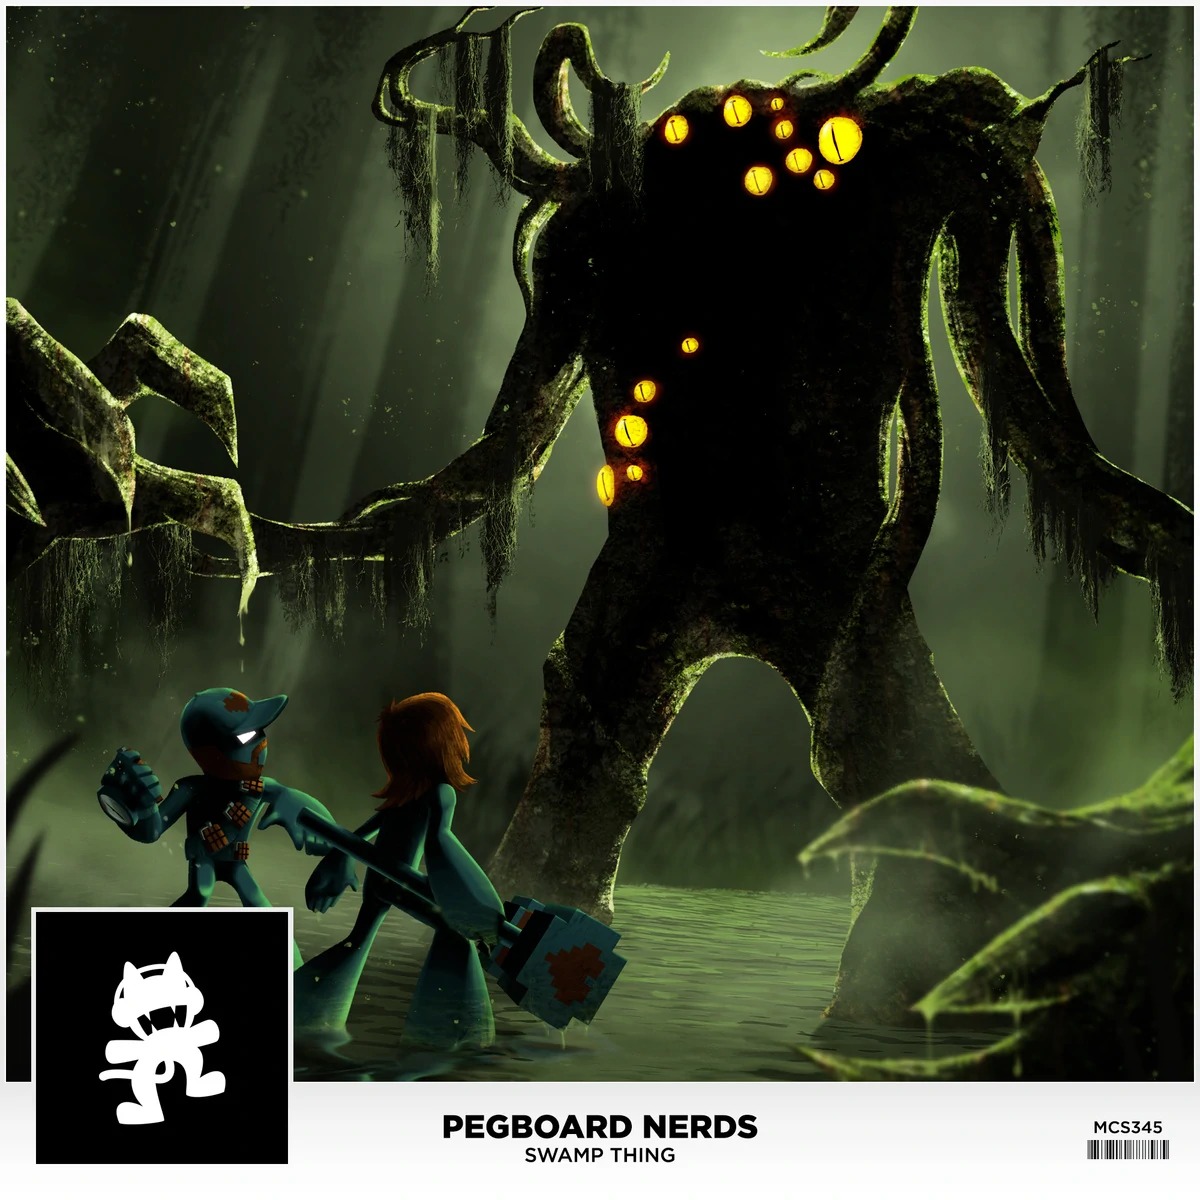 Pegboard Nerds Swamp Thing cover artwork